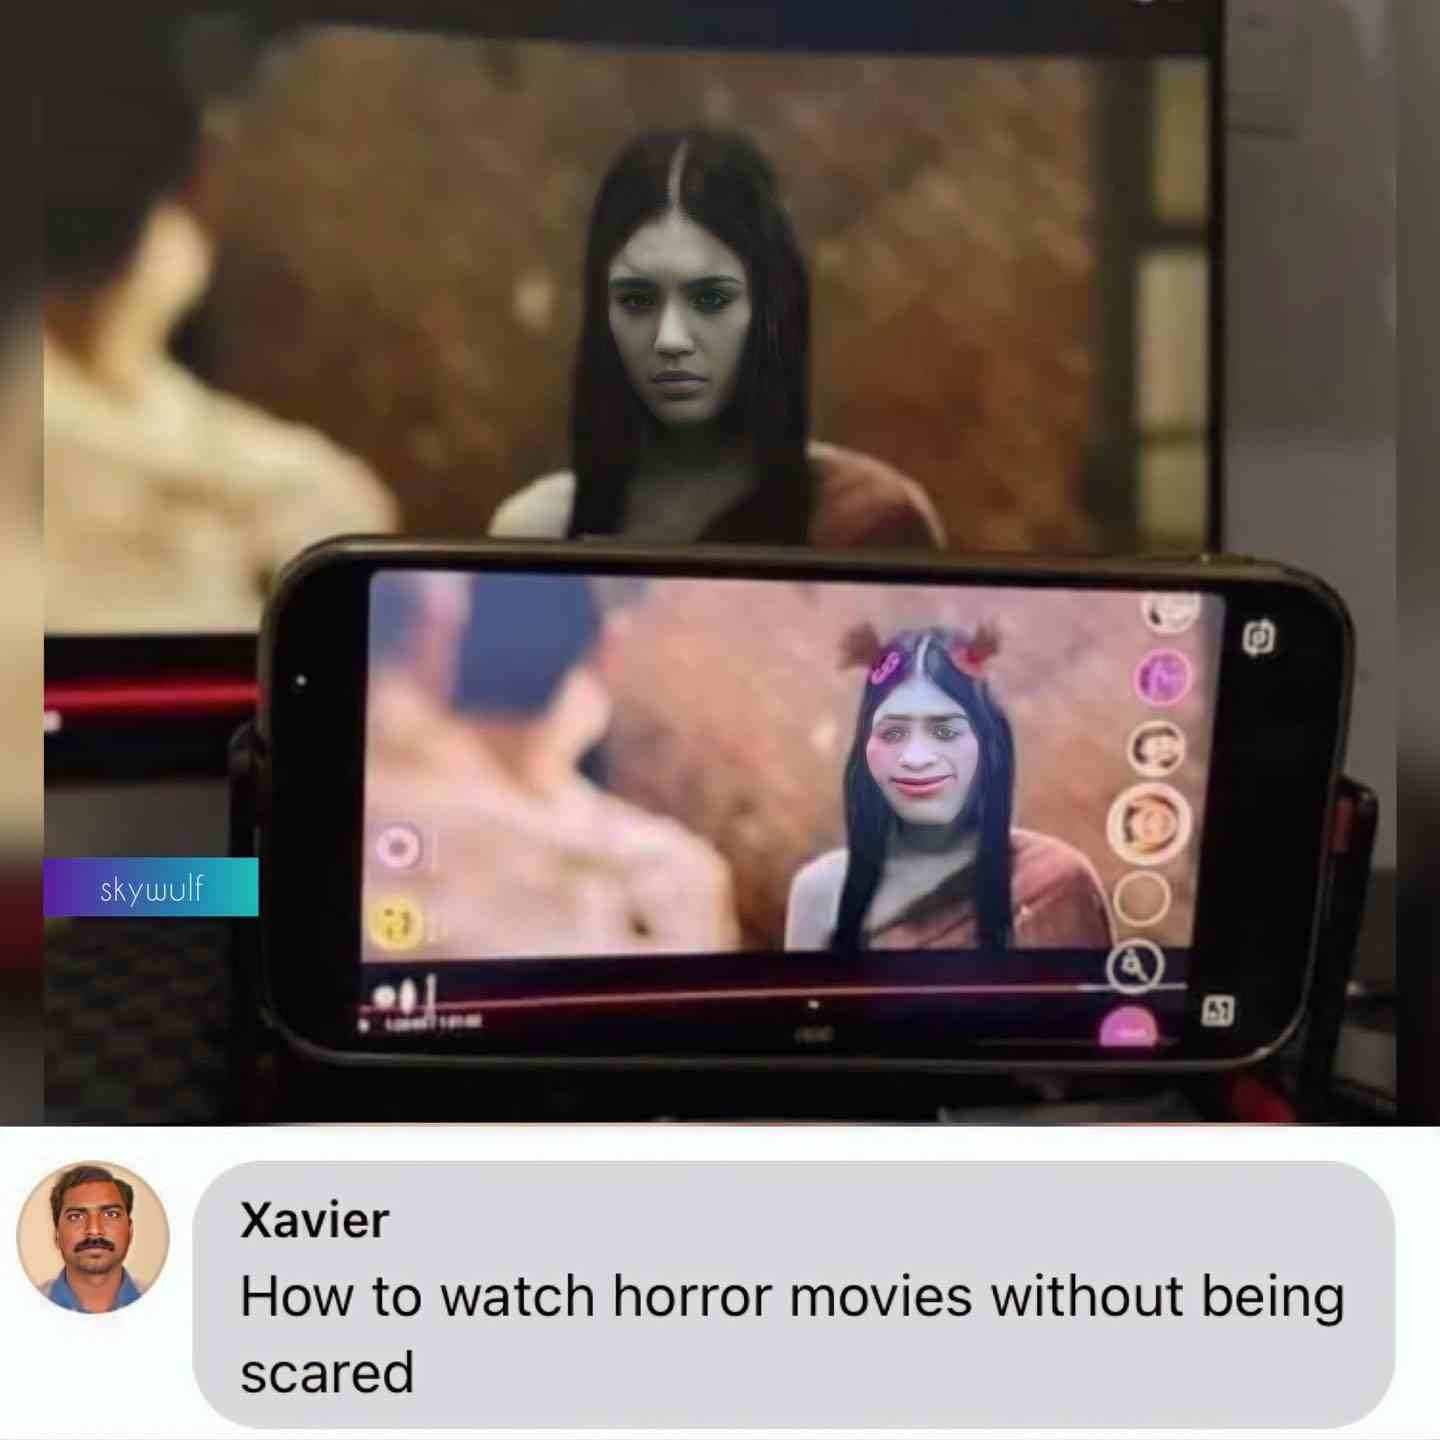 How to watch horror movies without being scared